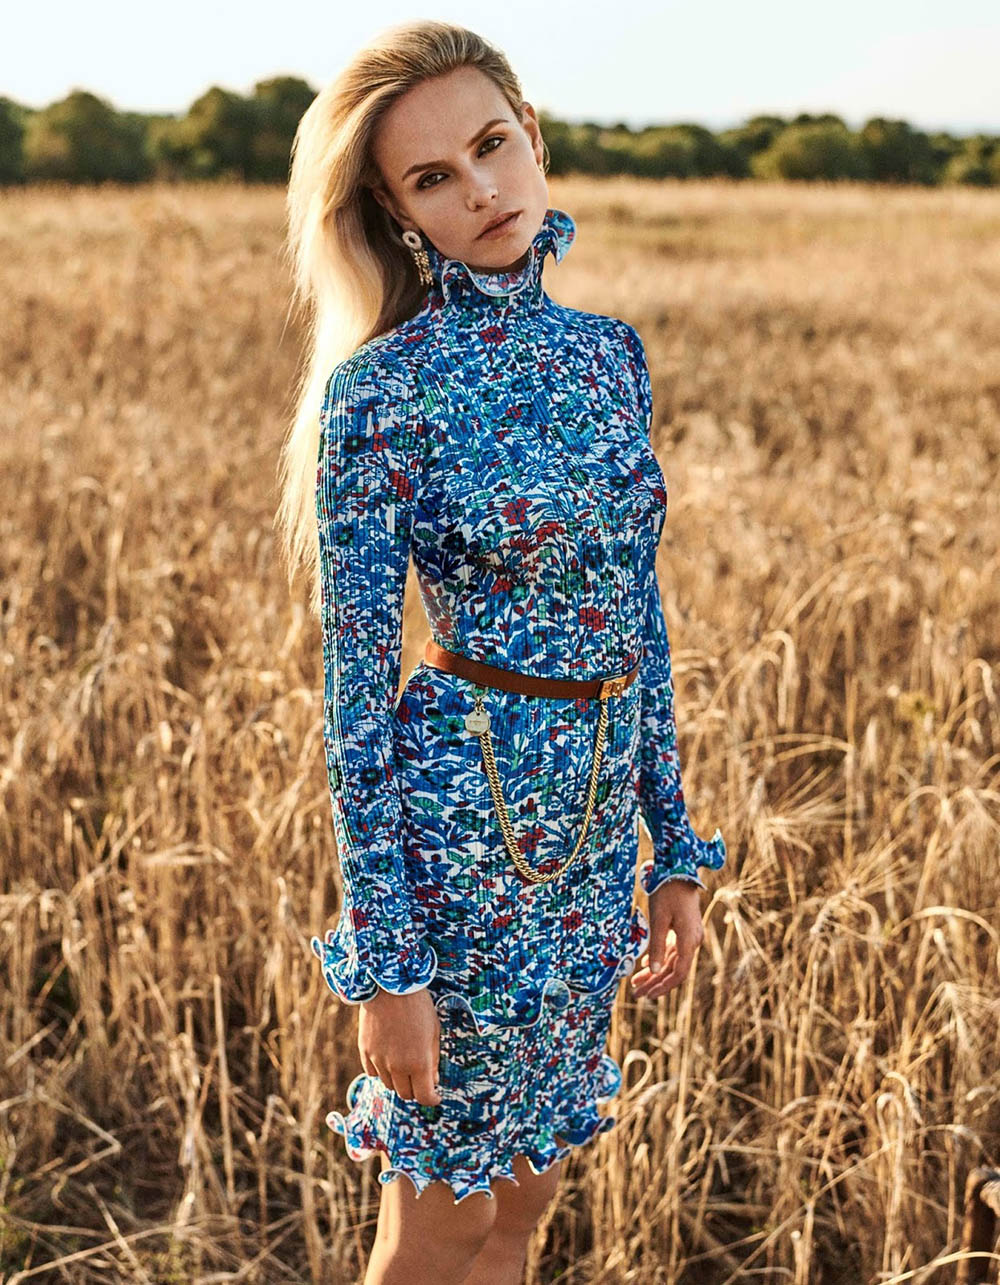 Natasha Poly covers The Sunday Times Style September 15th, 2019 by Giampaolo Sgura